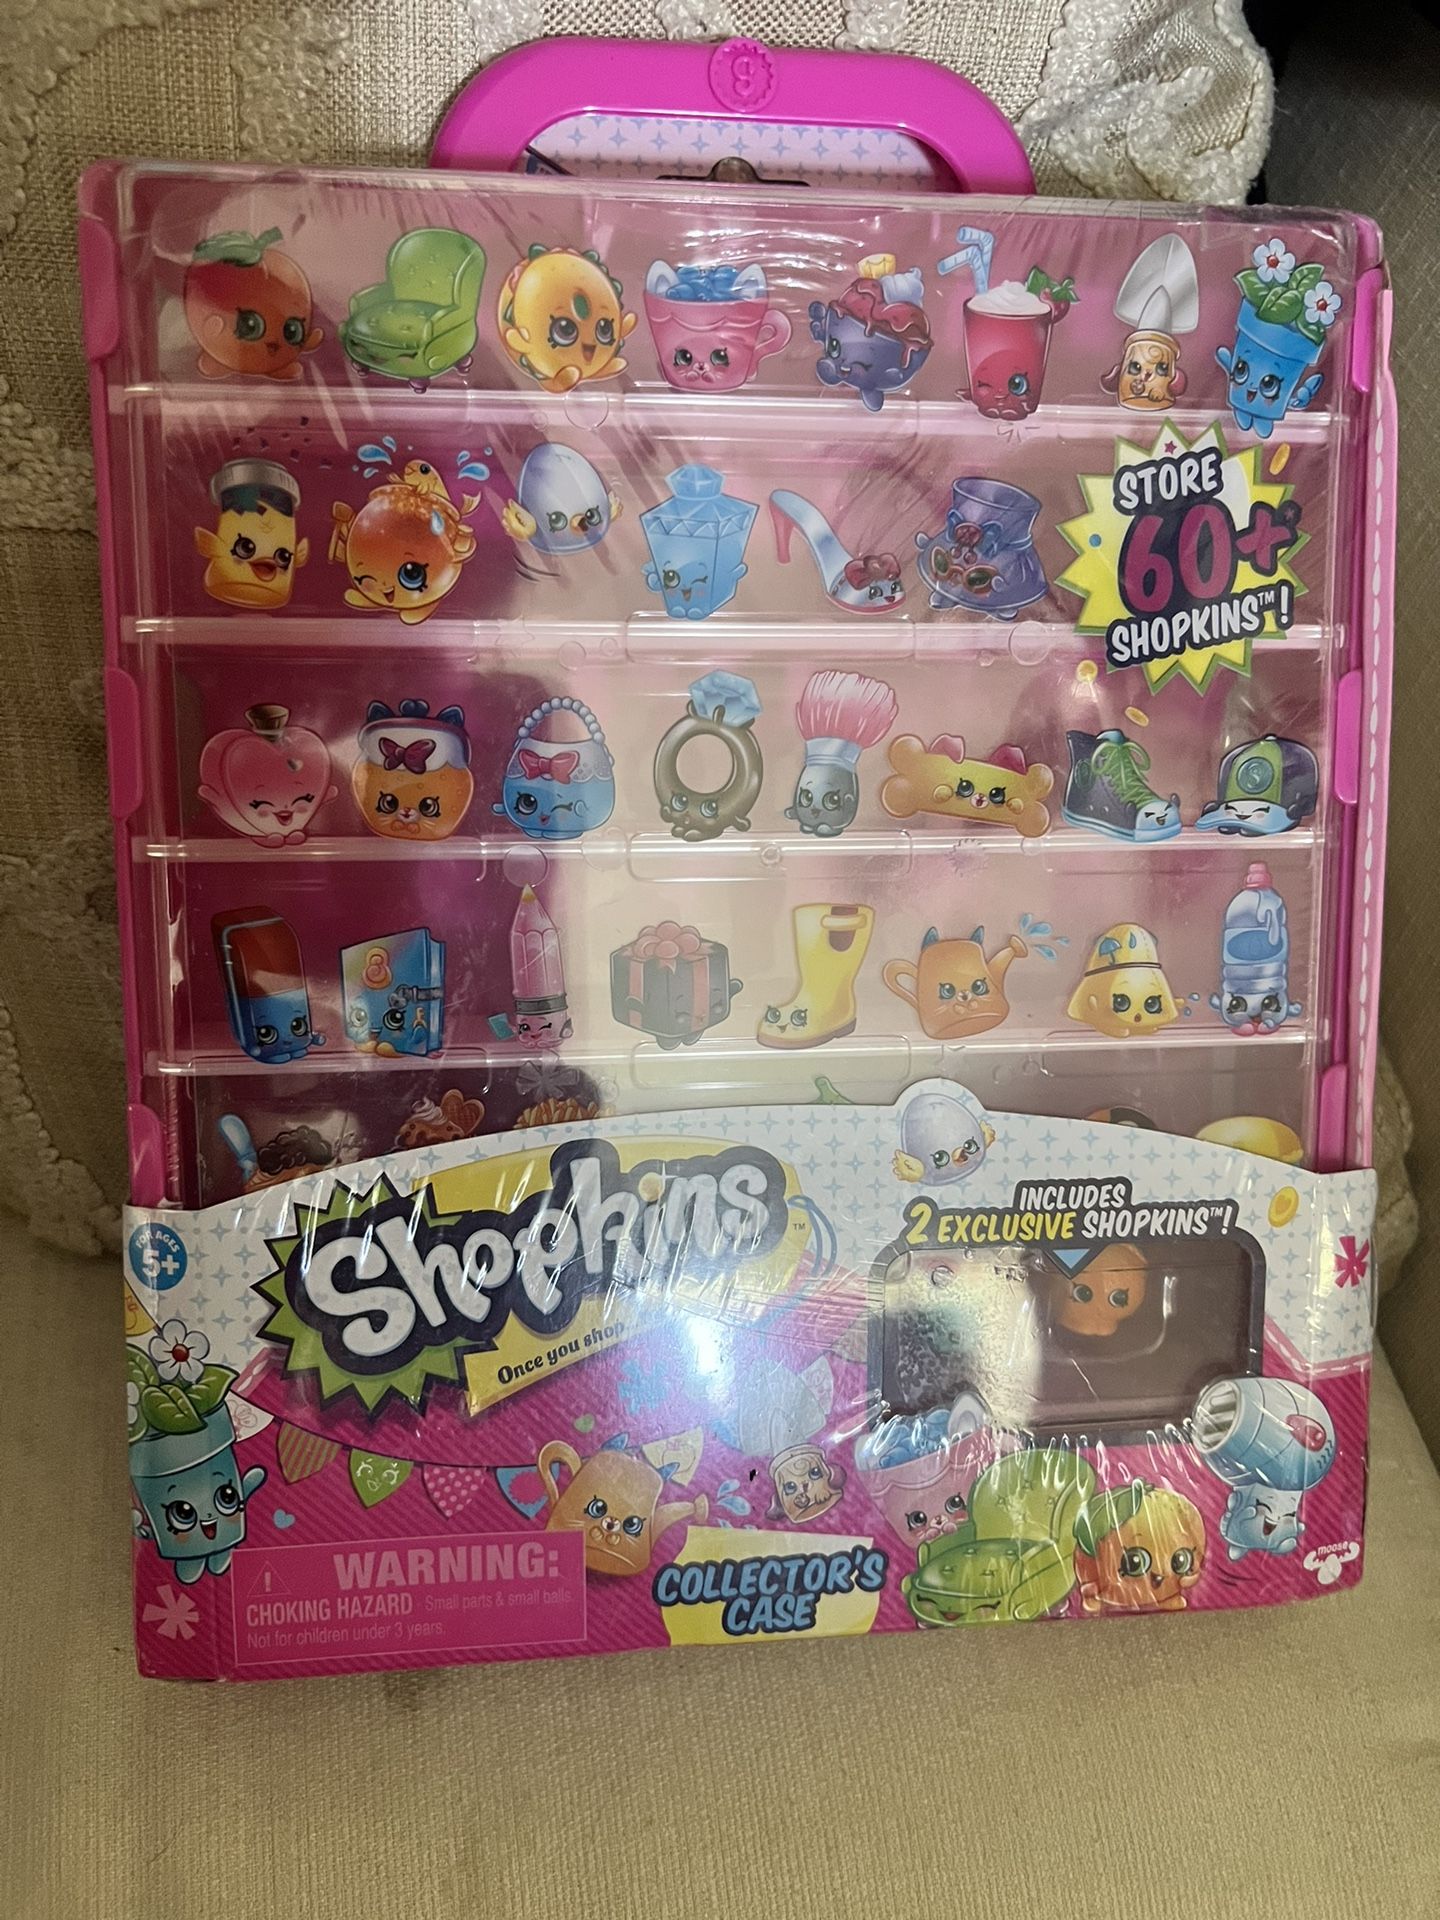 Shopkins Collection Case for Sale in Biscayne Park, FL - OfferUp